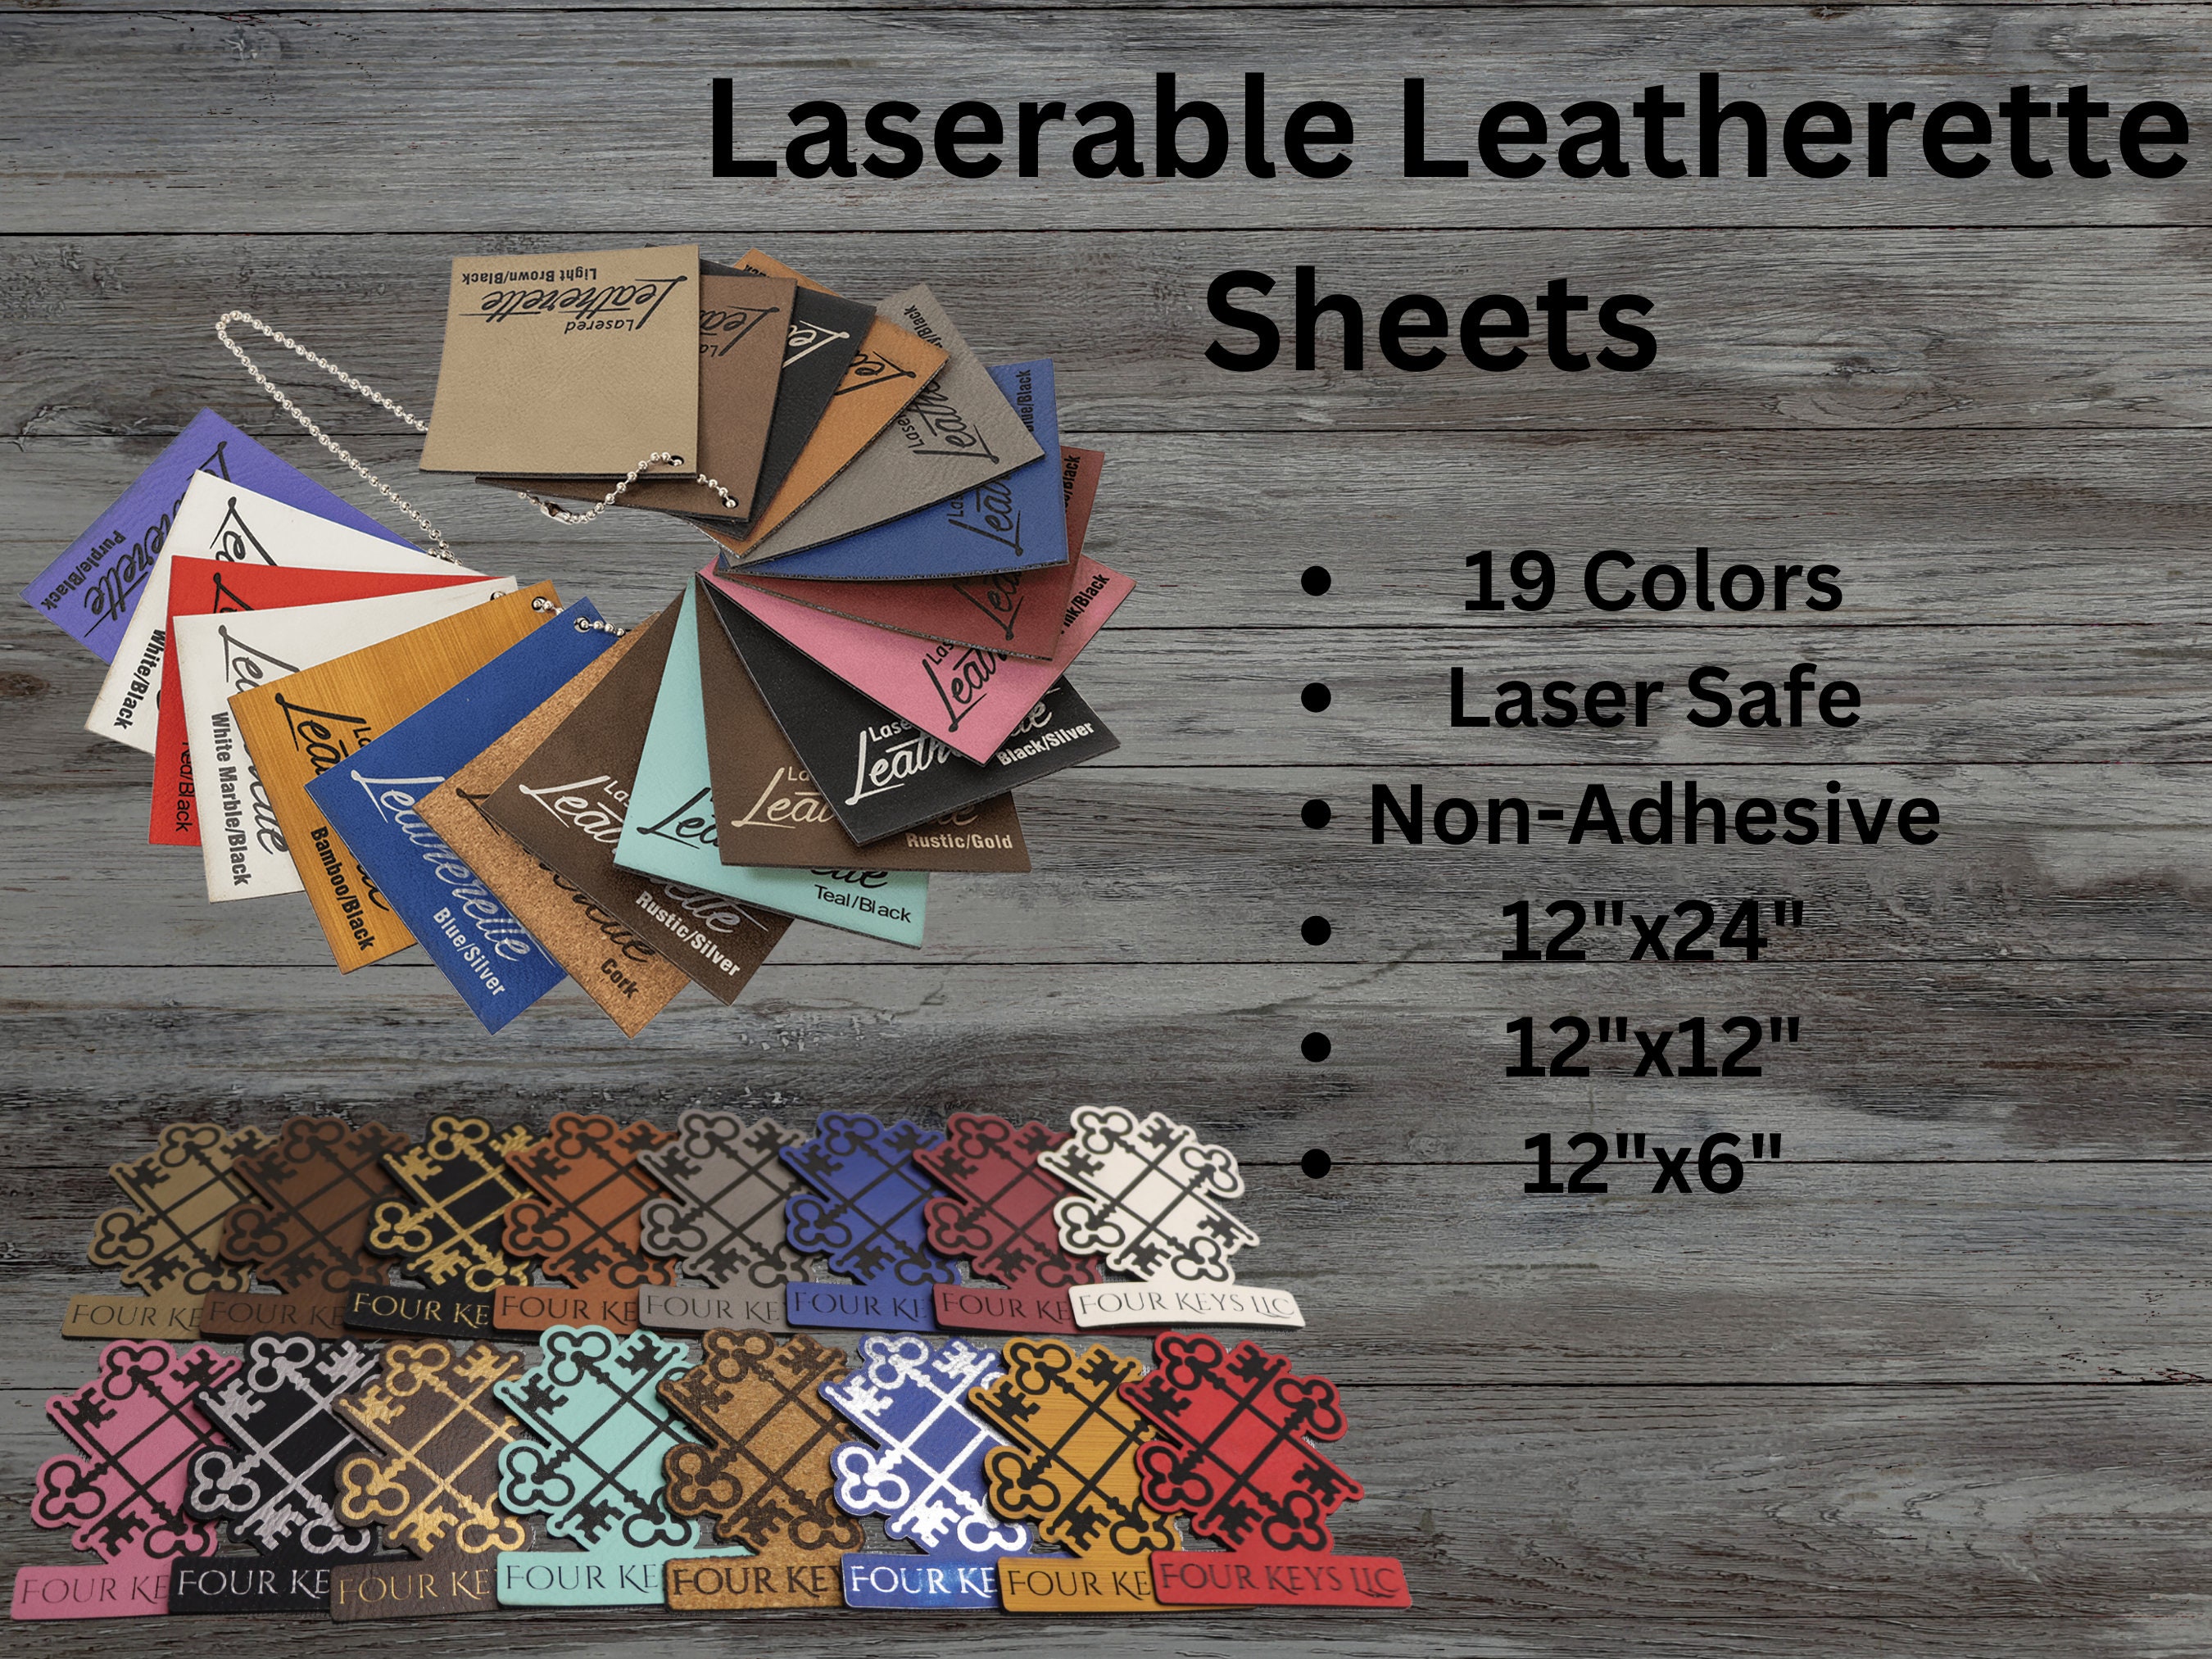 Genuine Leather Sheet 6x12, Assorted Color Full Grain Leather Sheets for Crafts Tooling Sewing Wallet Earring Hobby, 5 Sheets Thickness 1.5mm to 2